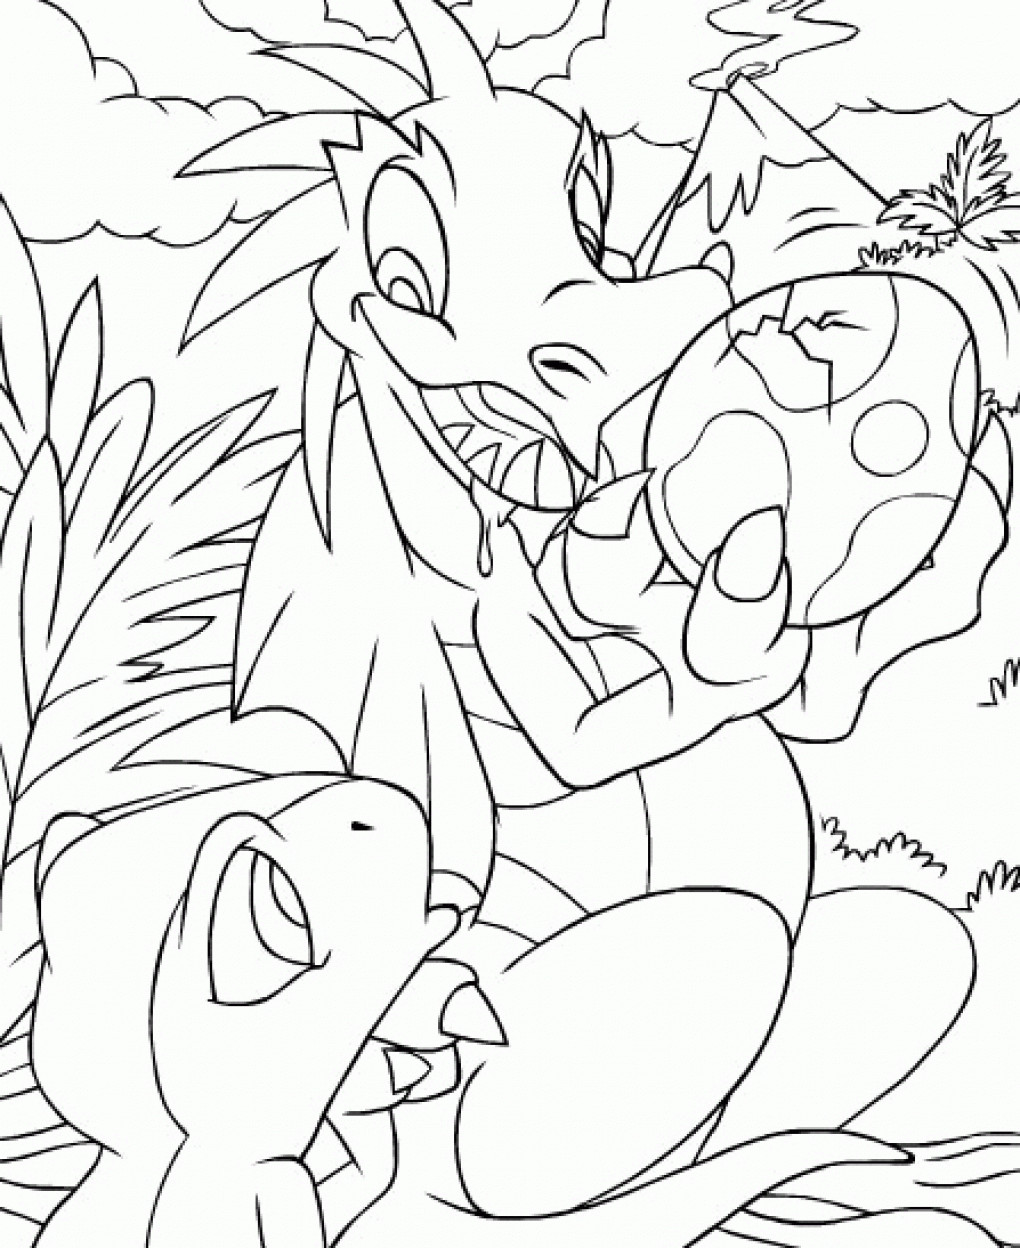 Coloring Pages To Color Online For Free
 Free Printable Neopets Coloring Pages For kids